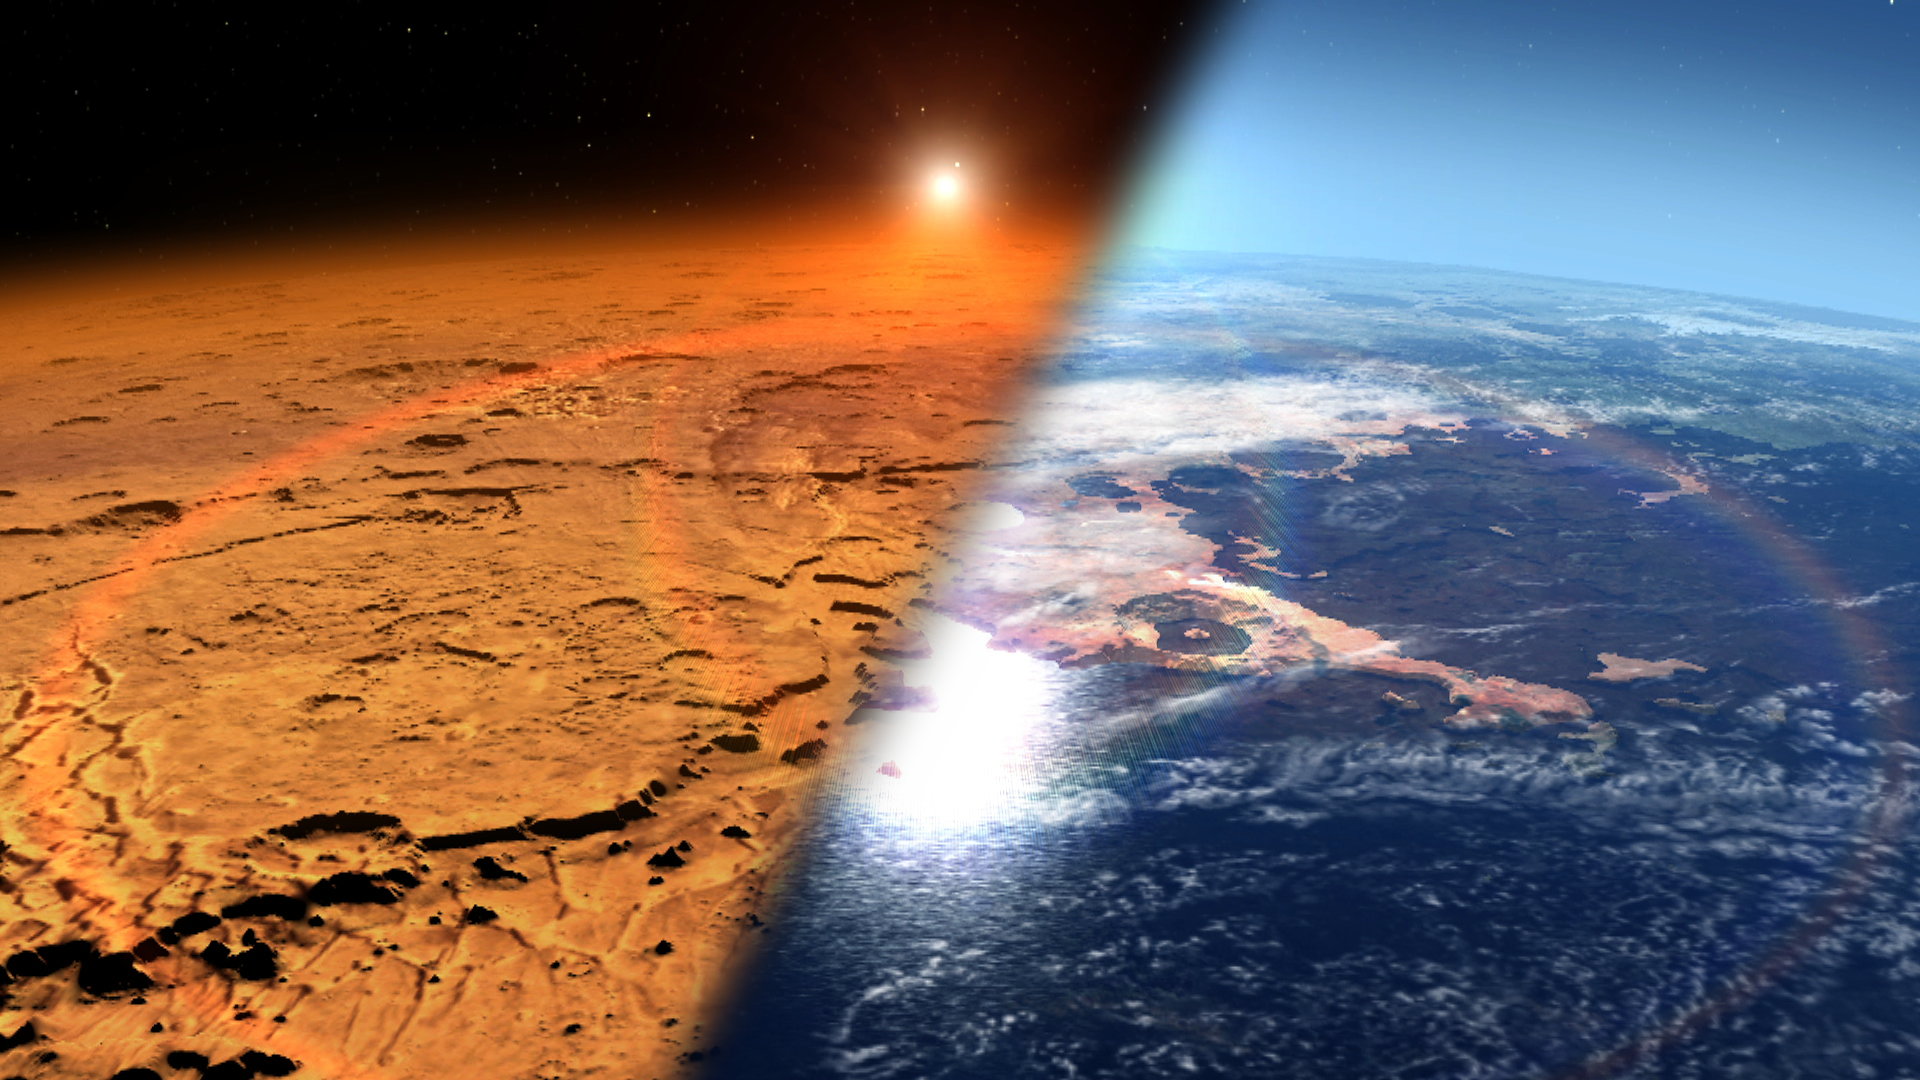 Conceptual image of changing Martian climate